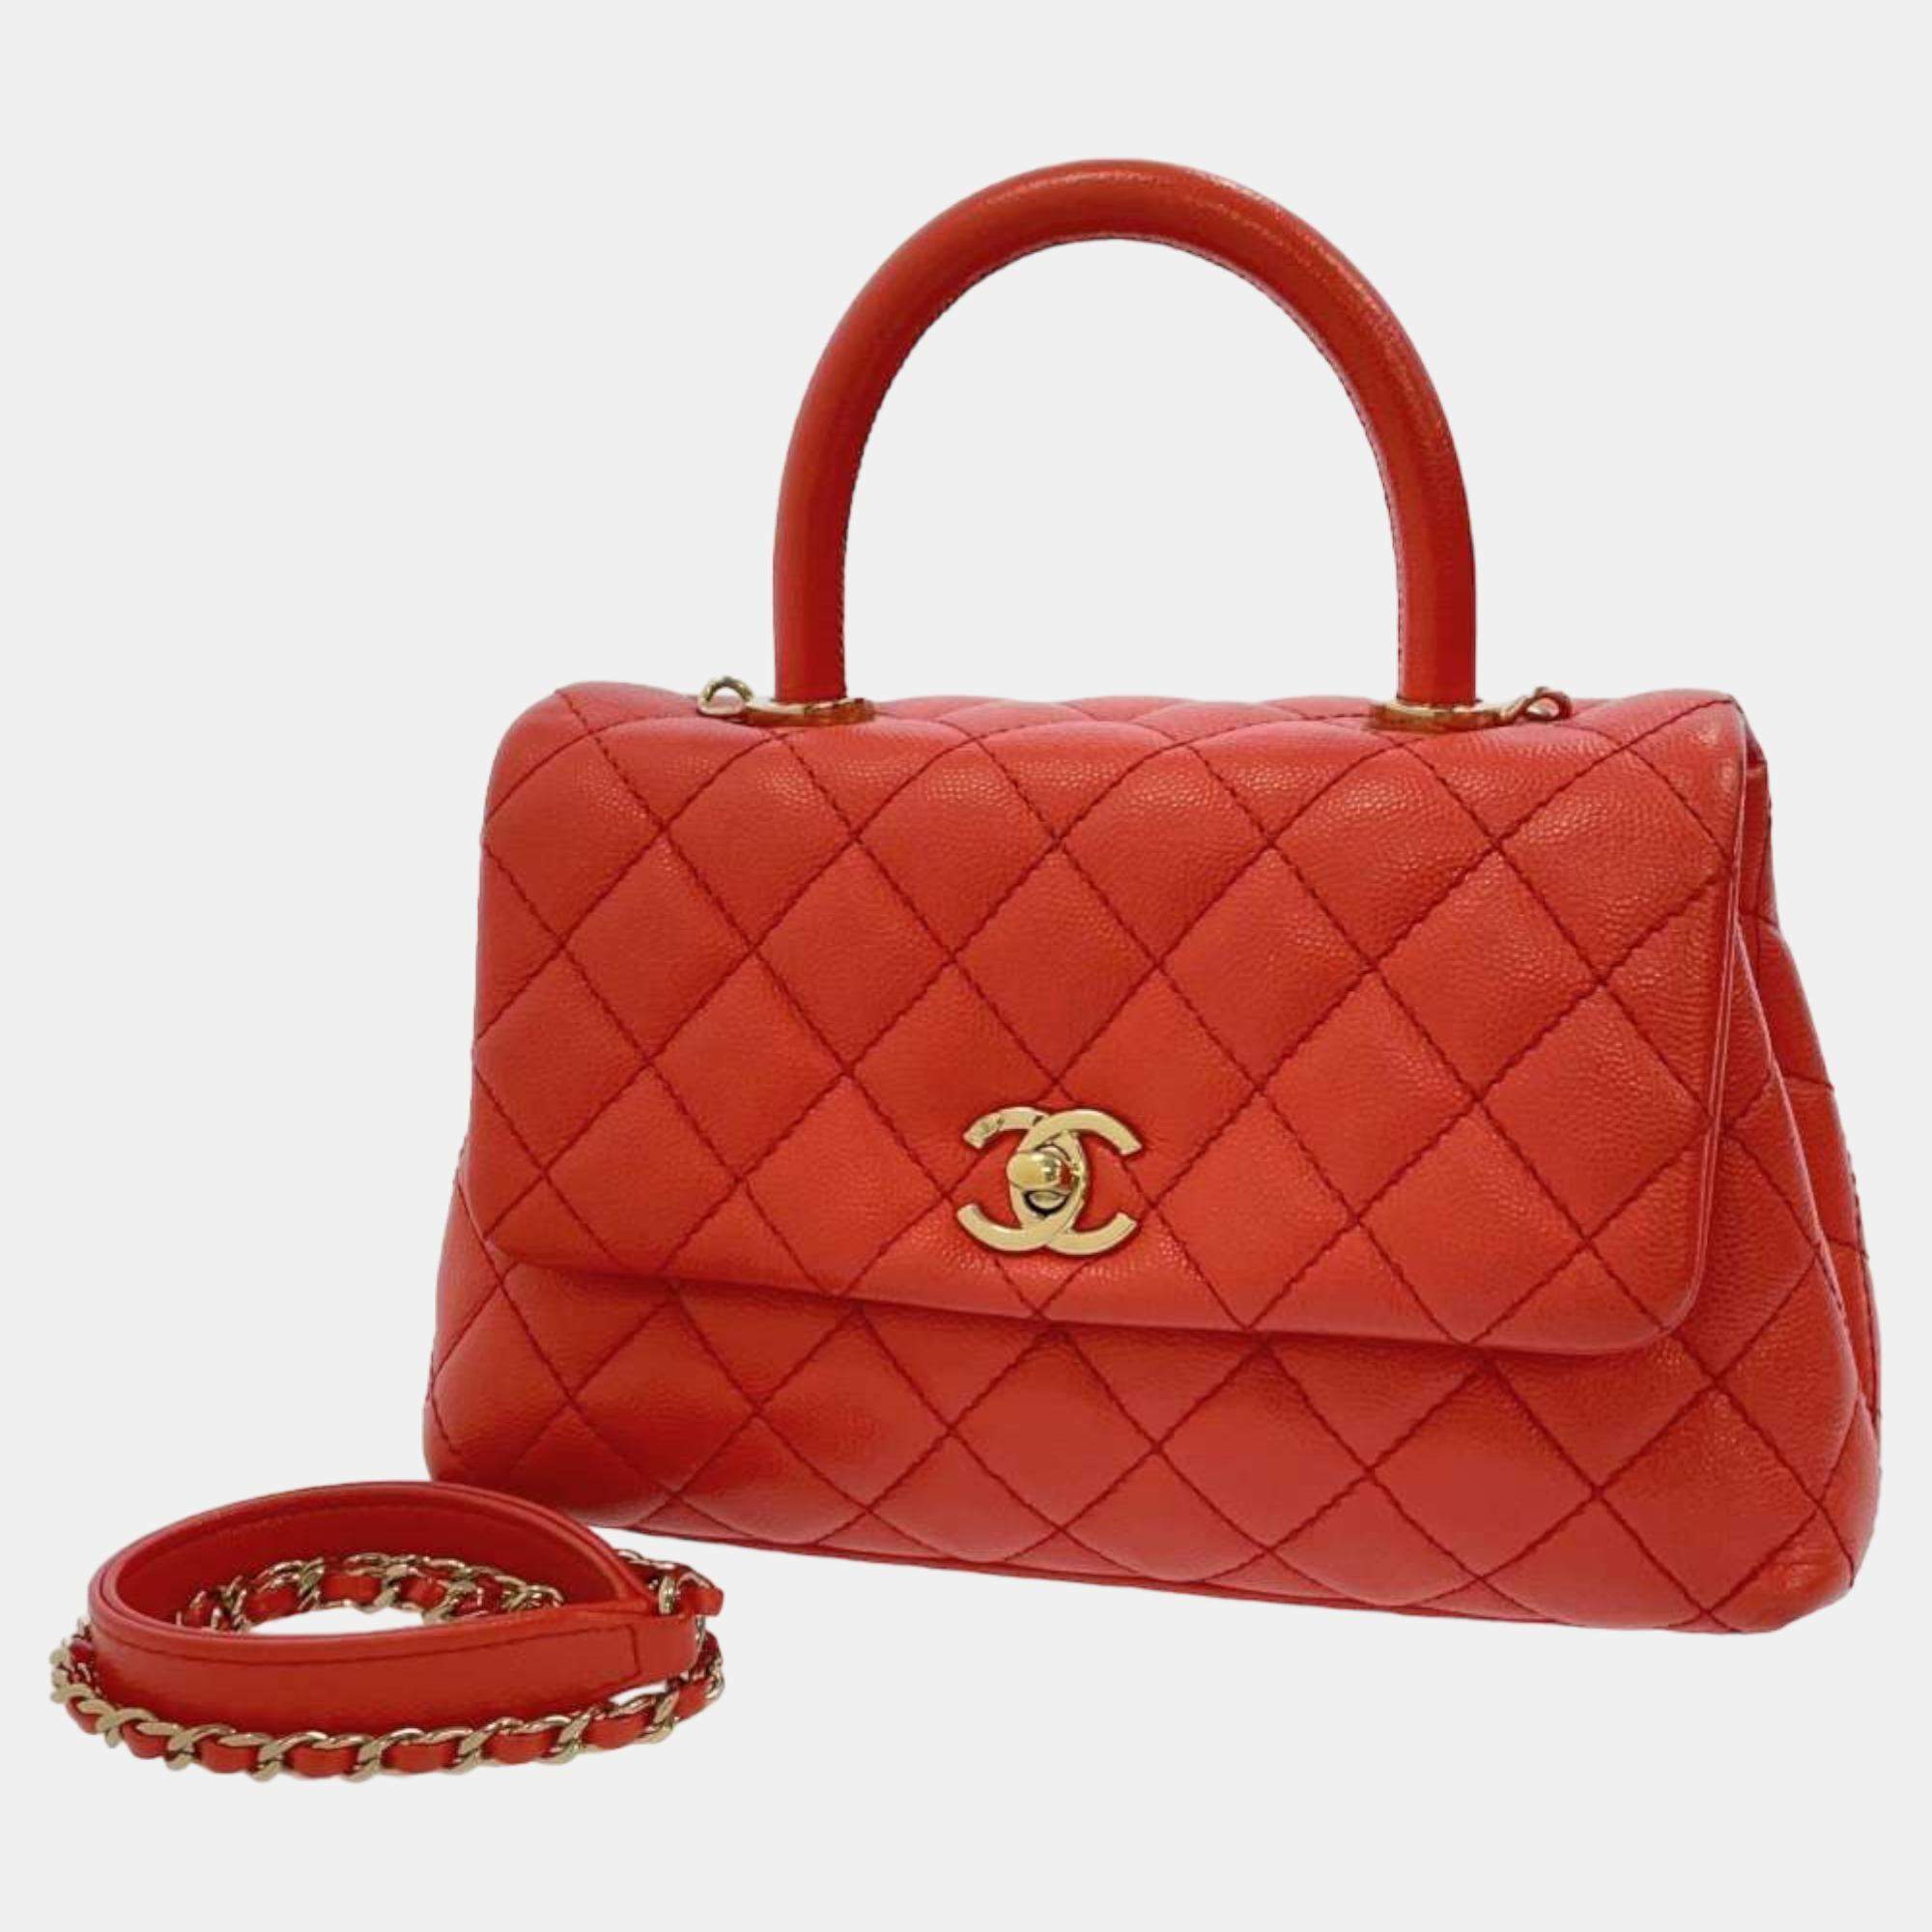 Chanel Red Caviar Leather Coco Top Handle Bag Chanel